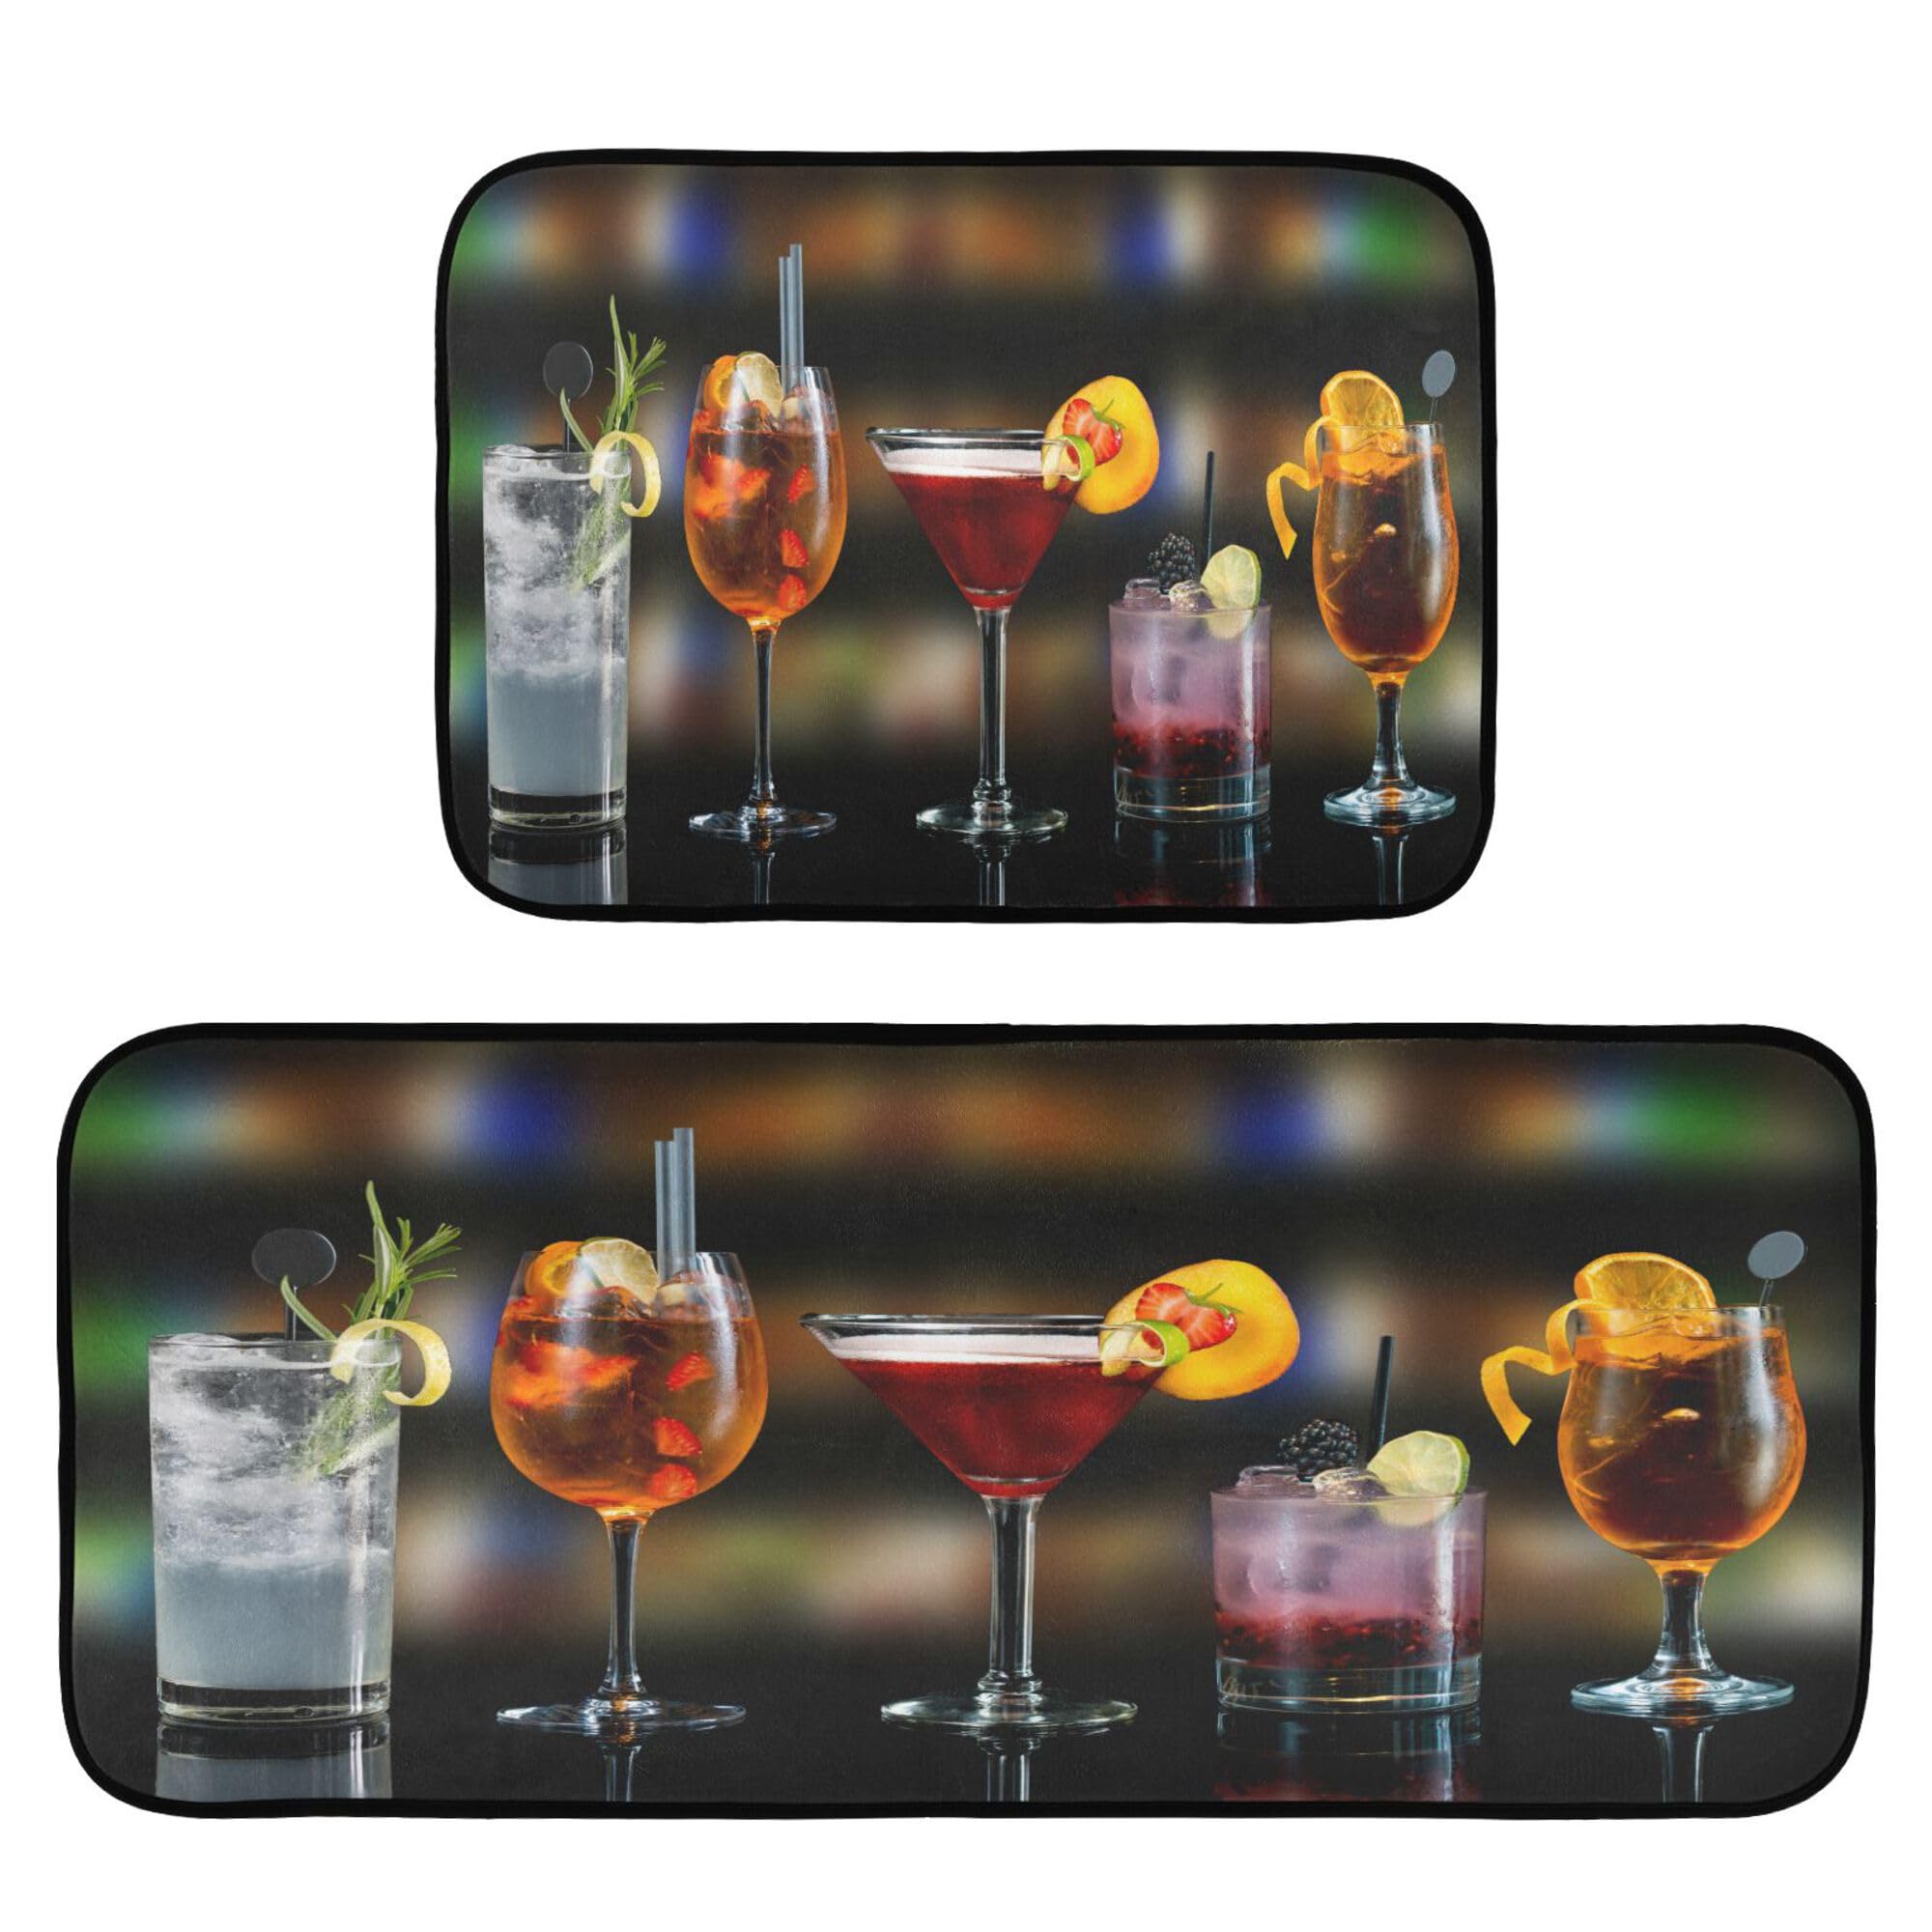 Cocktails Bar 2 Piece Kitchen Rugs and Mats Set Washable Runner Rug Carpets Set Bedroom Laundry Bathroom Area Rugs 19.7x47.2+19.7x27.6 Martini Spritz Bramble Gin Tonic